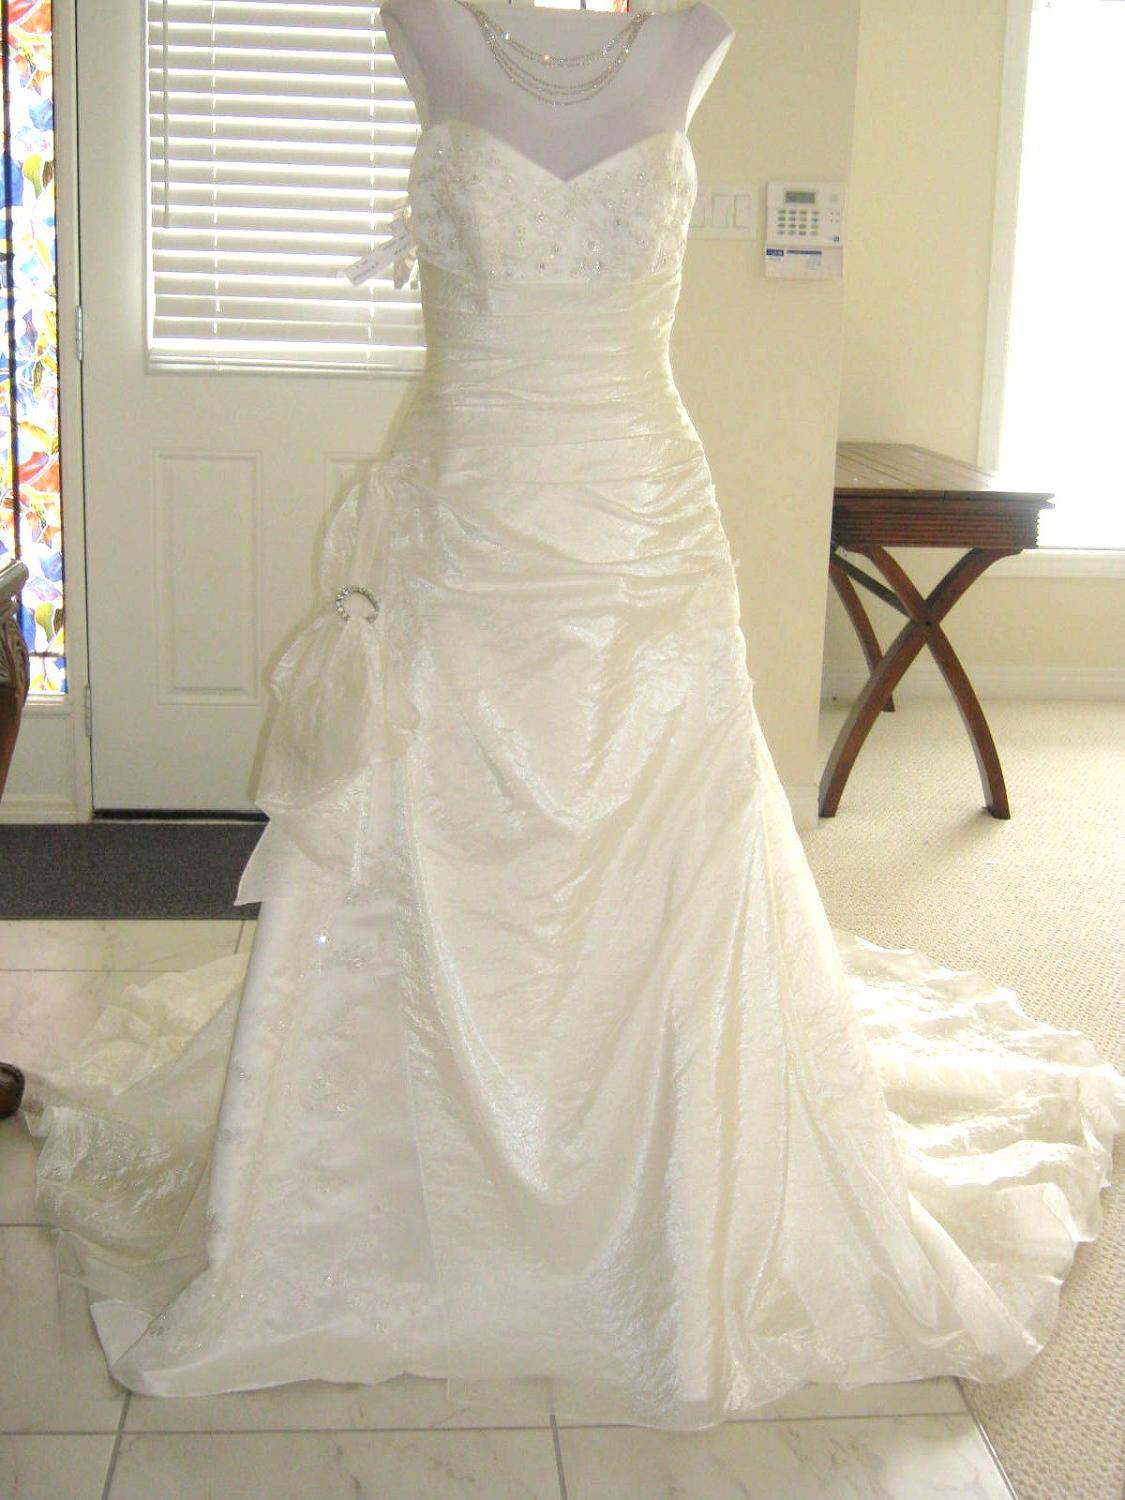 Gorgeous Strapless Ivory Wedding Dress with Dramatic Pickups and 1950s Demi